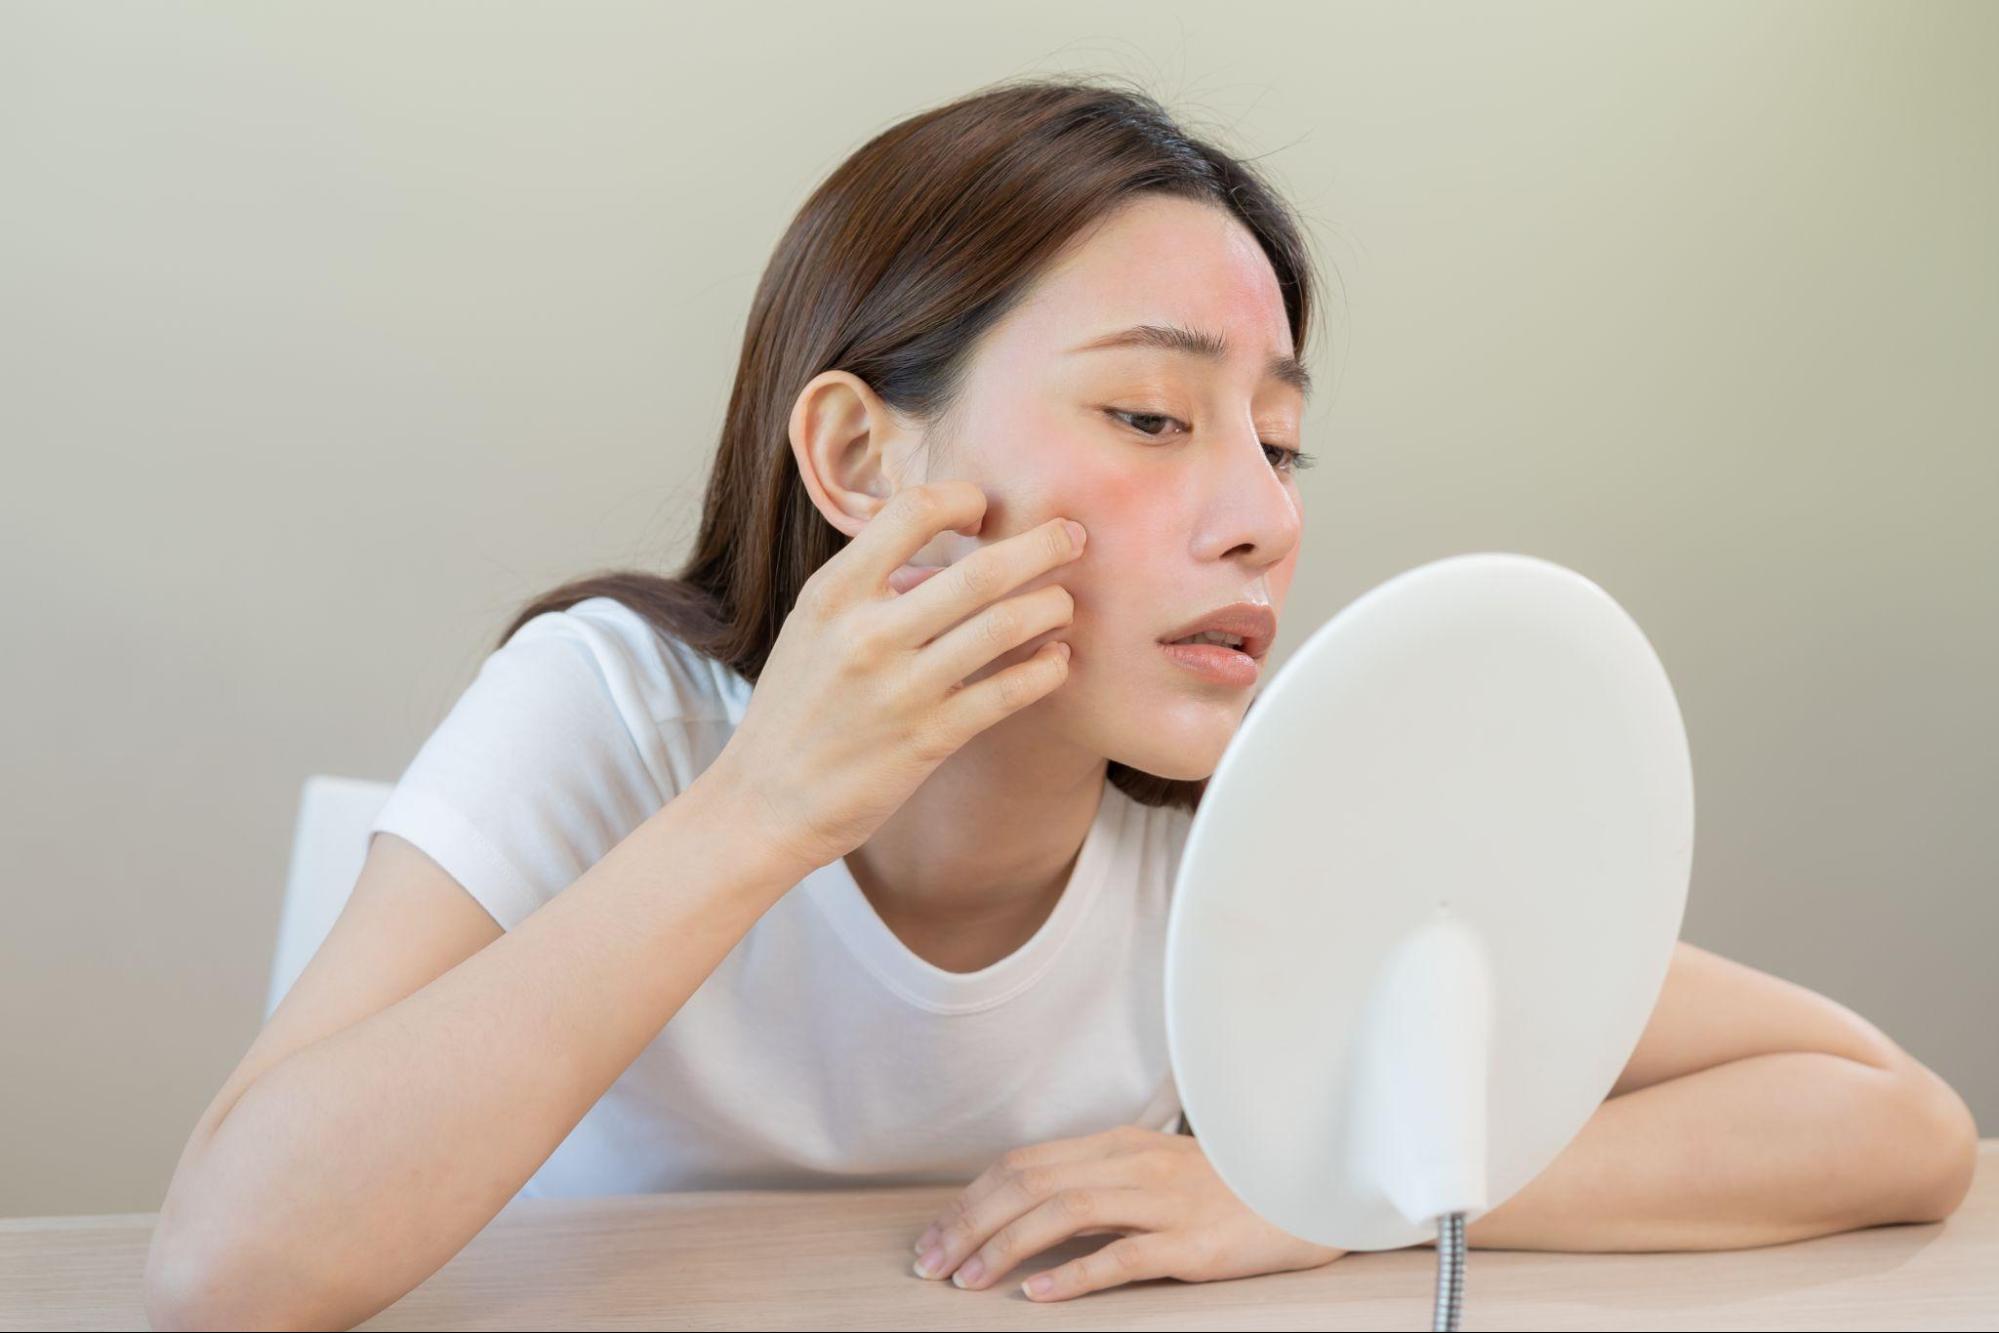 Unintentional Habits That Can Cause Acne